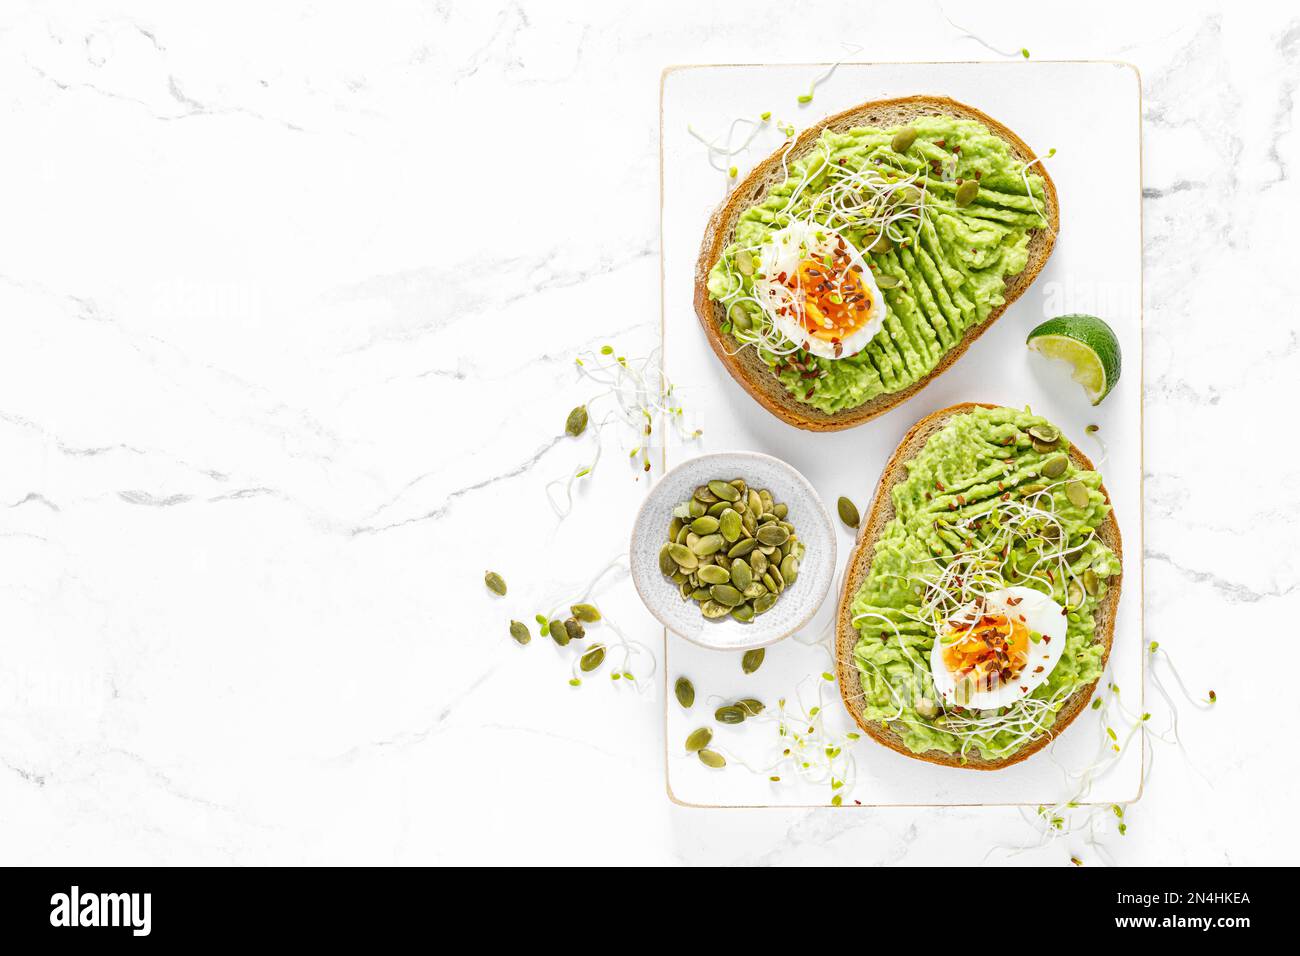 Avocado toast with boiled egg, seeds and sprouts on white background. Healthy diet food. Top view Stock Photo